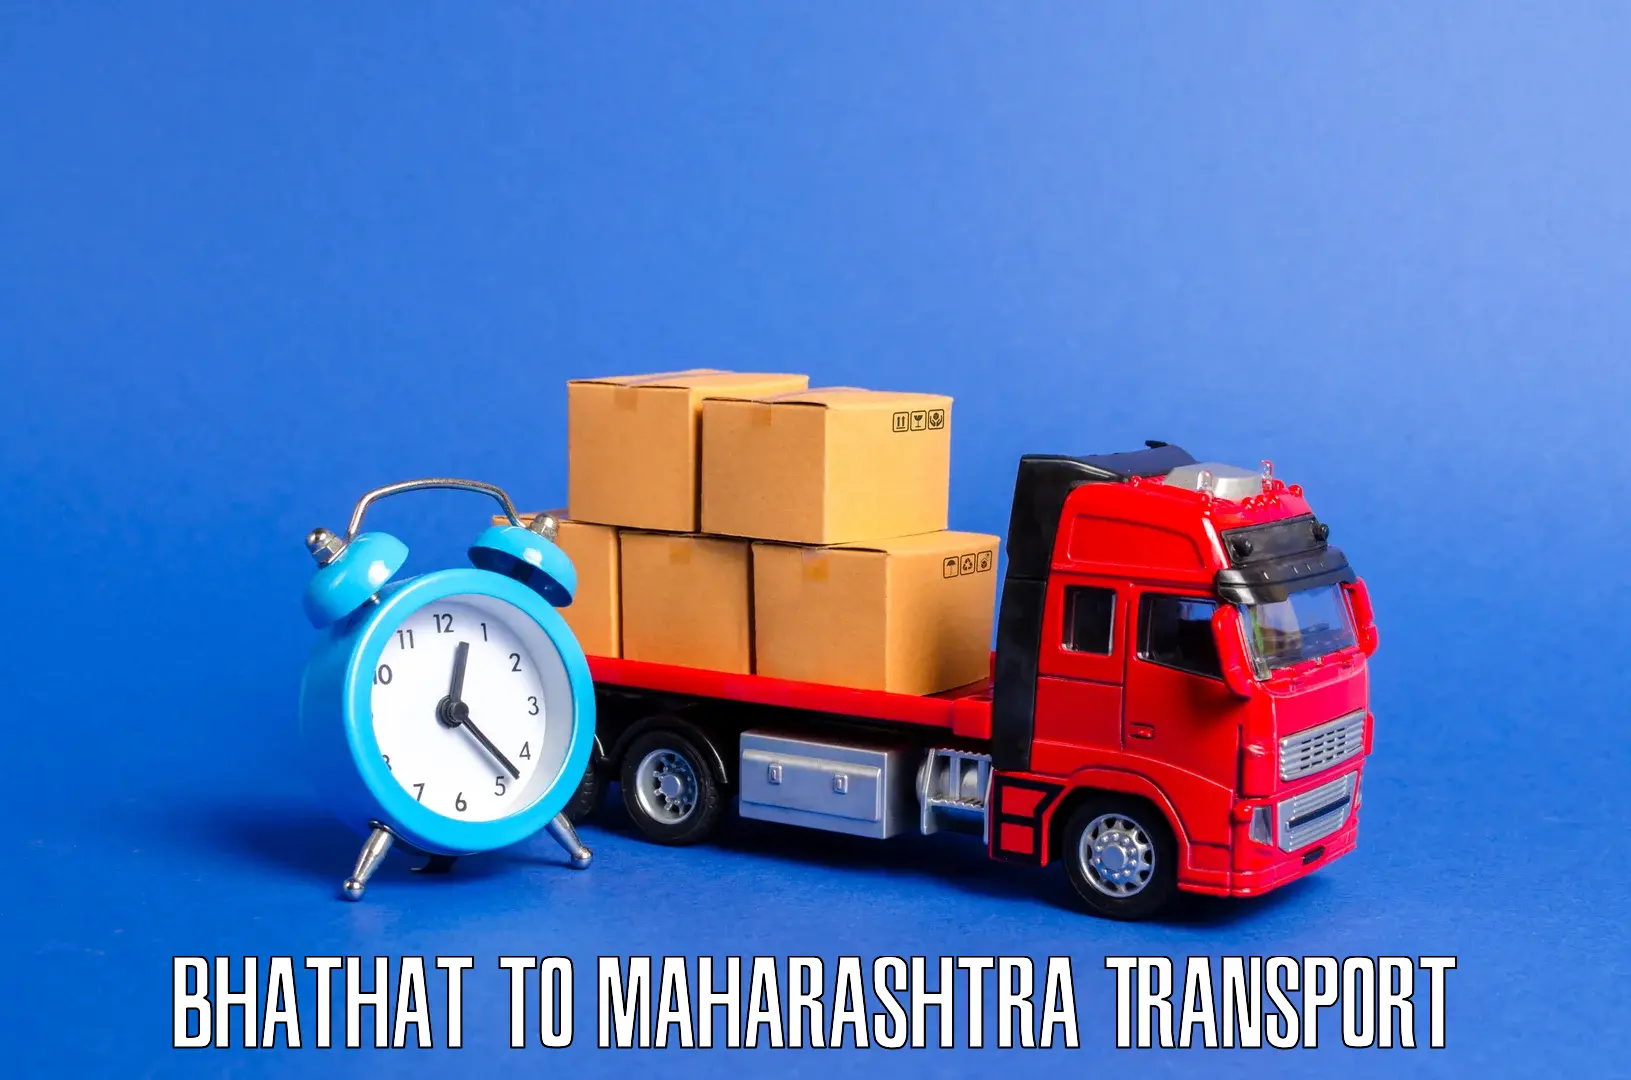 Land transport services in Bhathat to Maharashtra